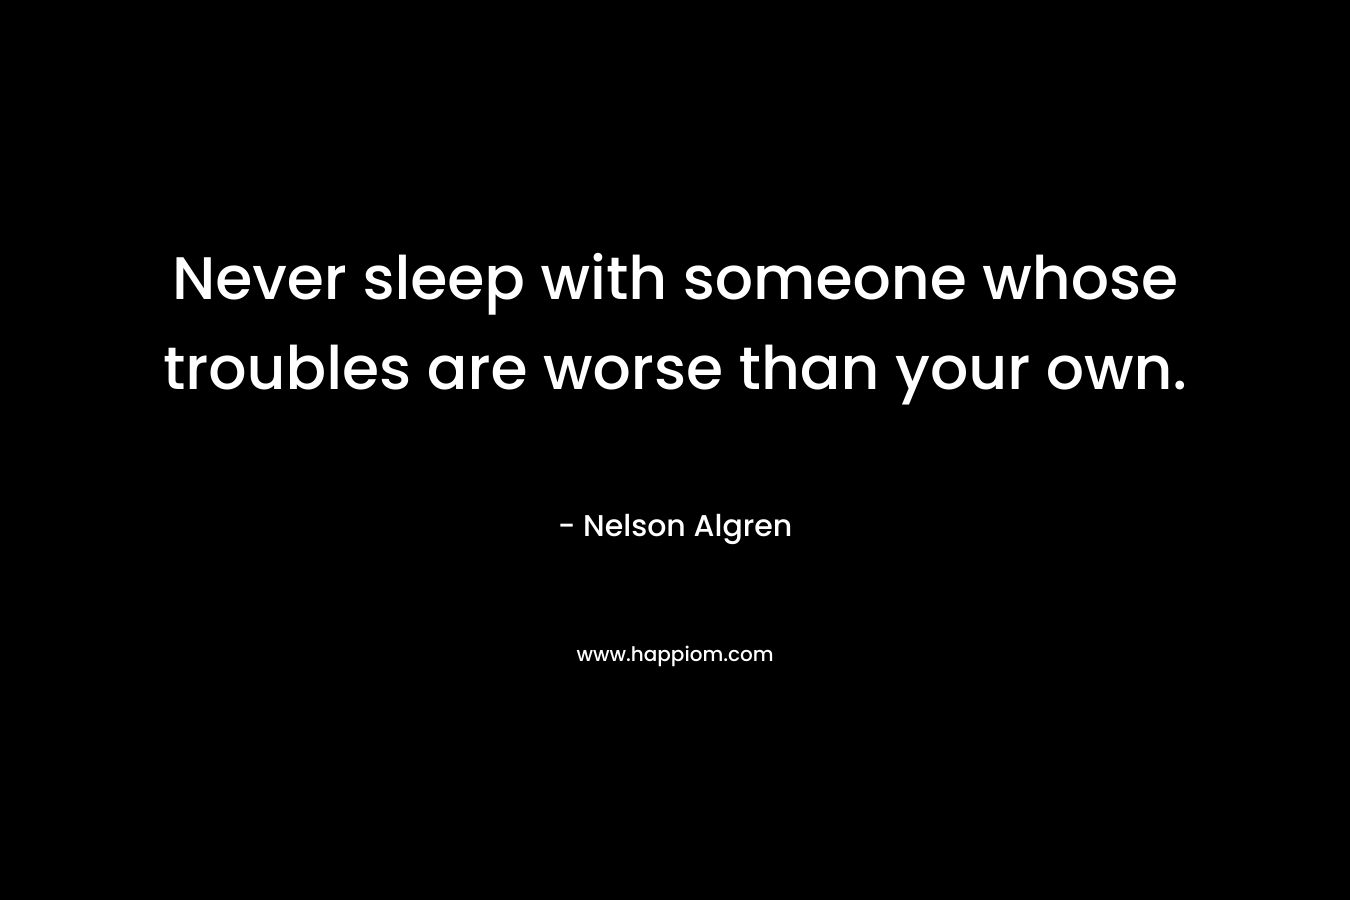 Never sleep with someone whose troubles are worse than your own. – Nelson Algren